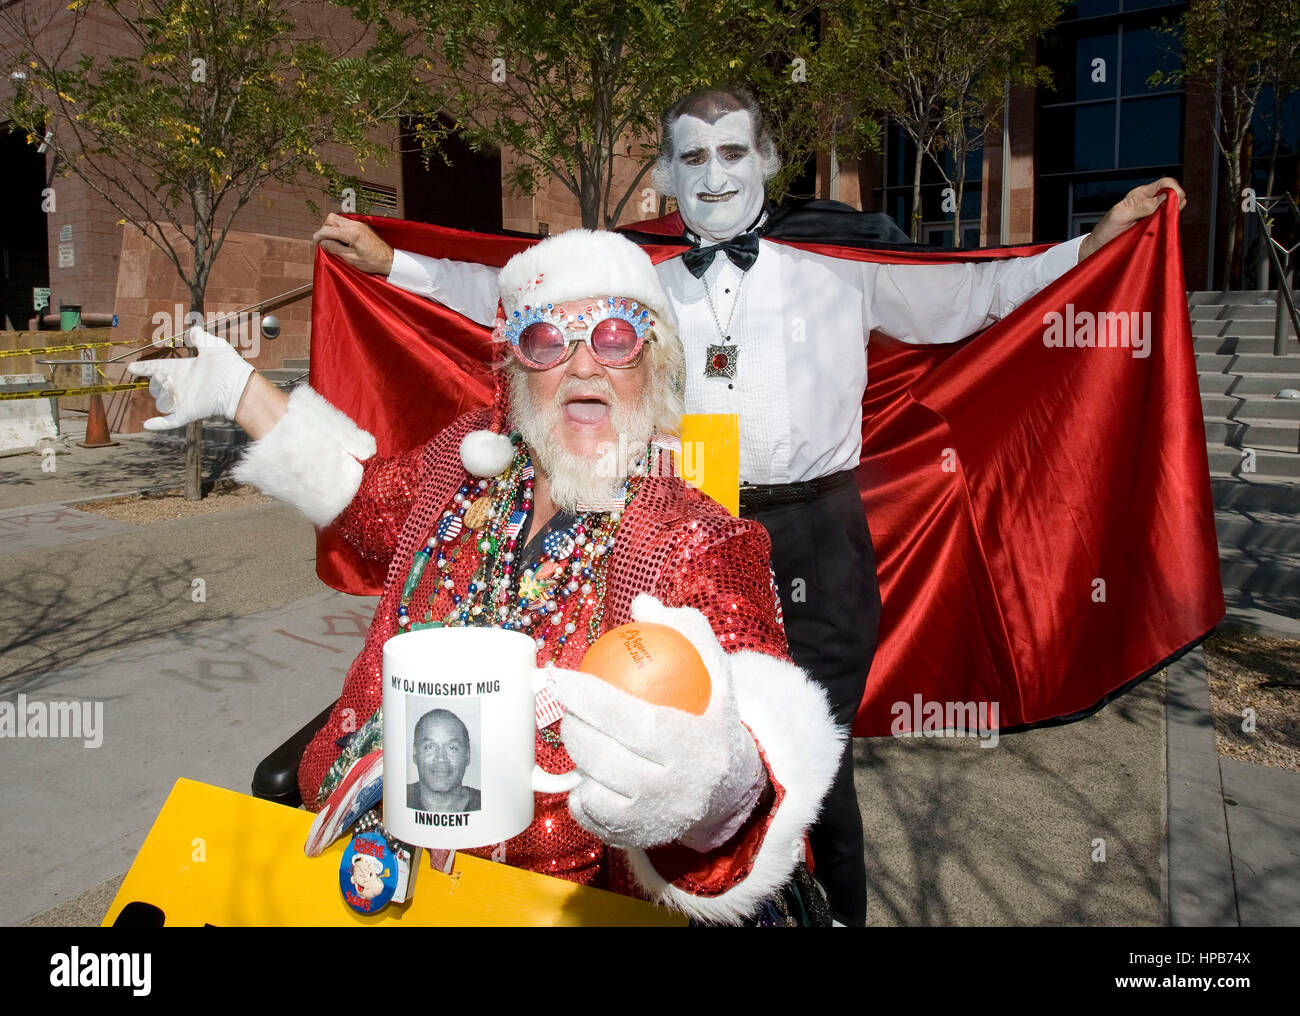 Bill Wandland of Las Vegas, left, holds his O.J. Simpson mug, and Joe Pepitone of Brooklyn, dresses up as Grandpa Munster in front of the Clark County Regional Justice building, the site of the O.J. Simpson trial in Las Vegas, NV on Monday,  Sept. 15, 2008. Photo credit: Francis Specker Stock Photo